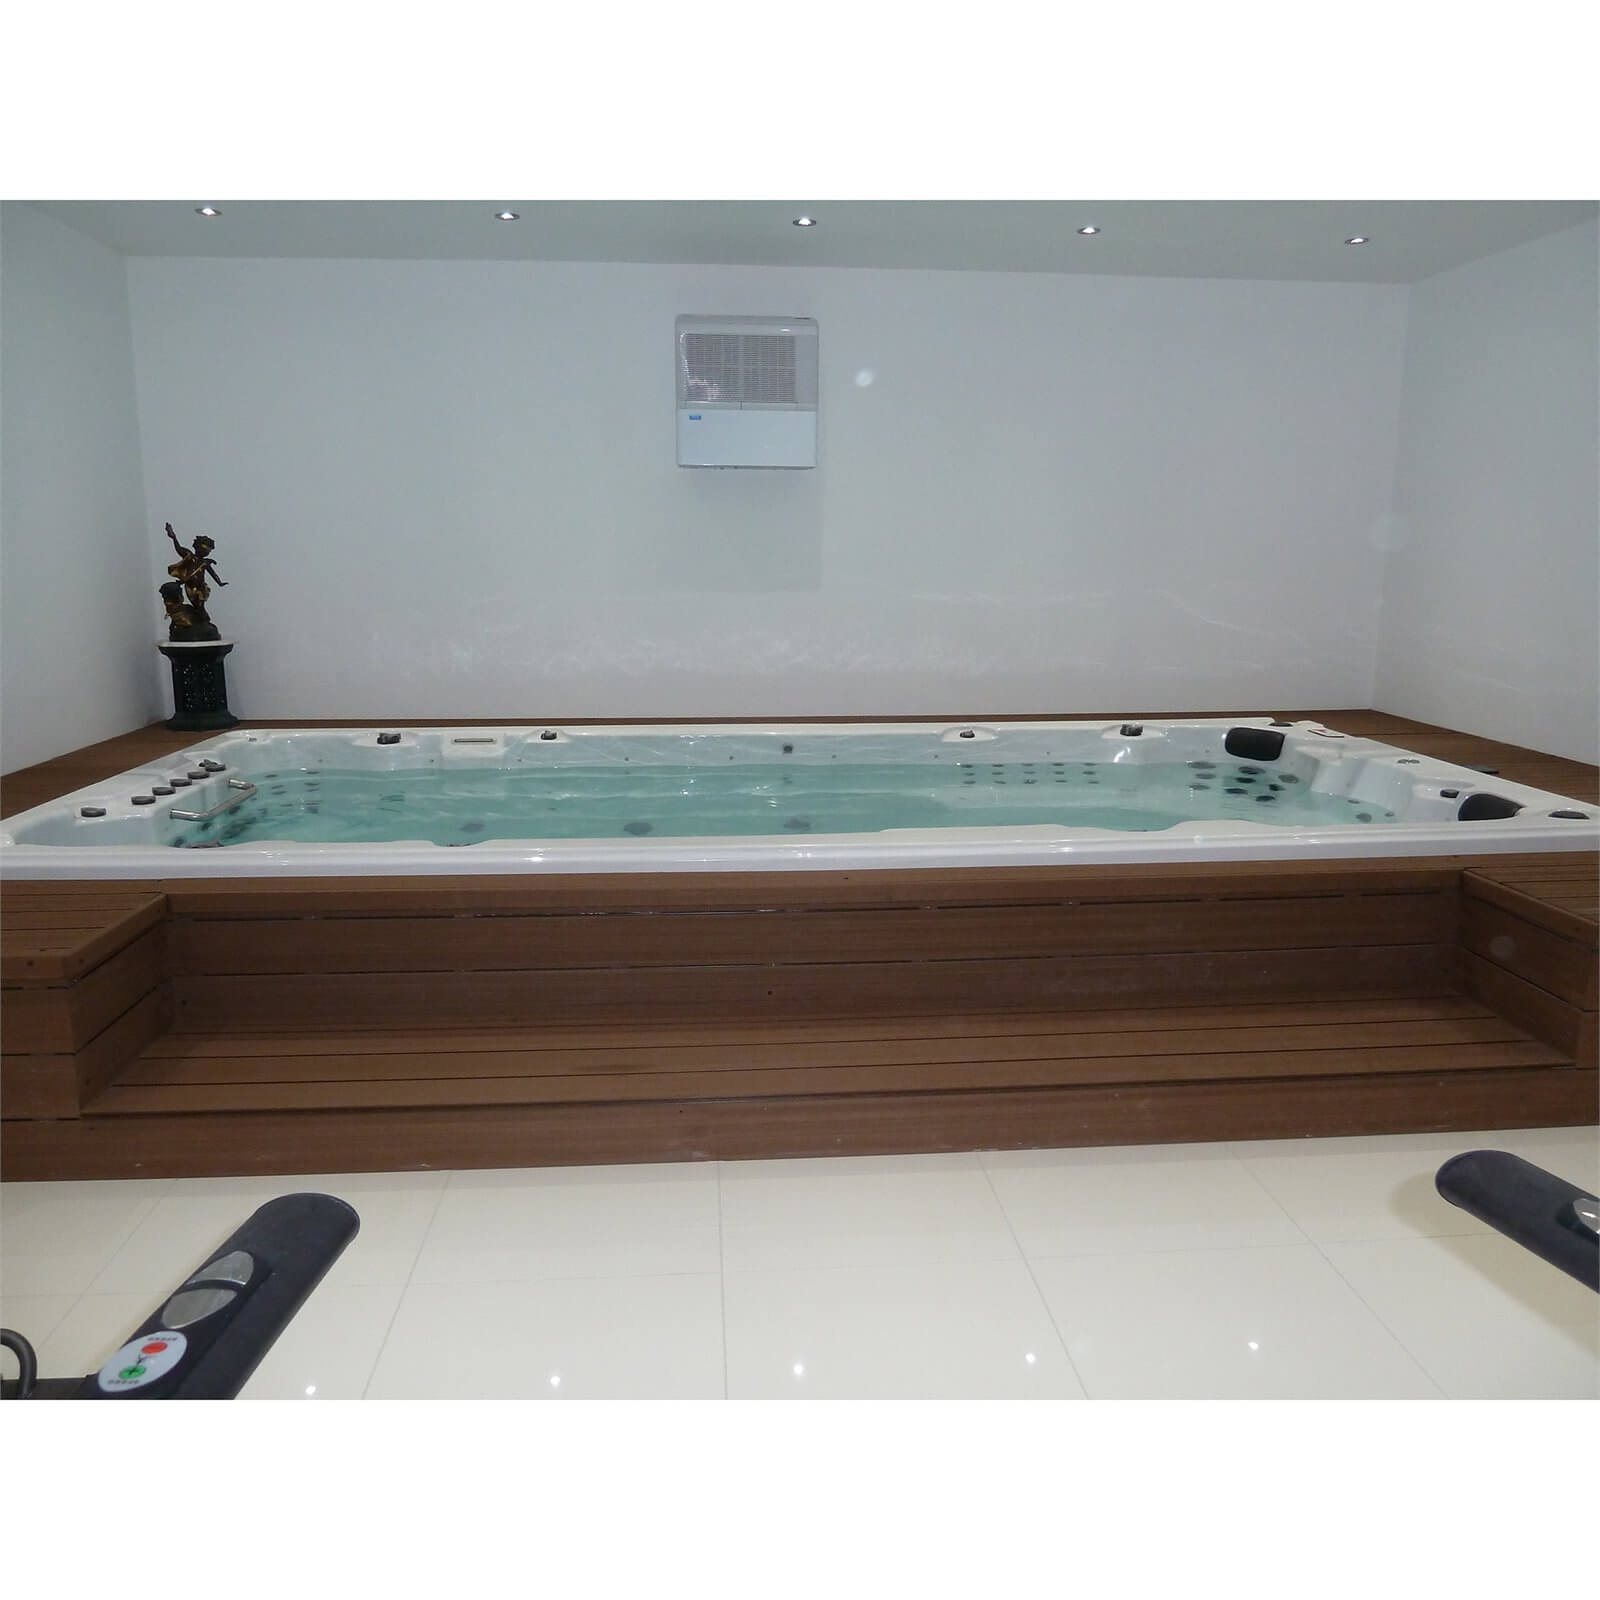 Canadian Spa 16ft Swim Spa St. Lawrence (Includes Free Delivery & Installation)